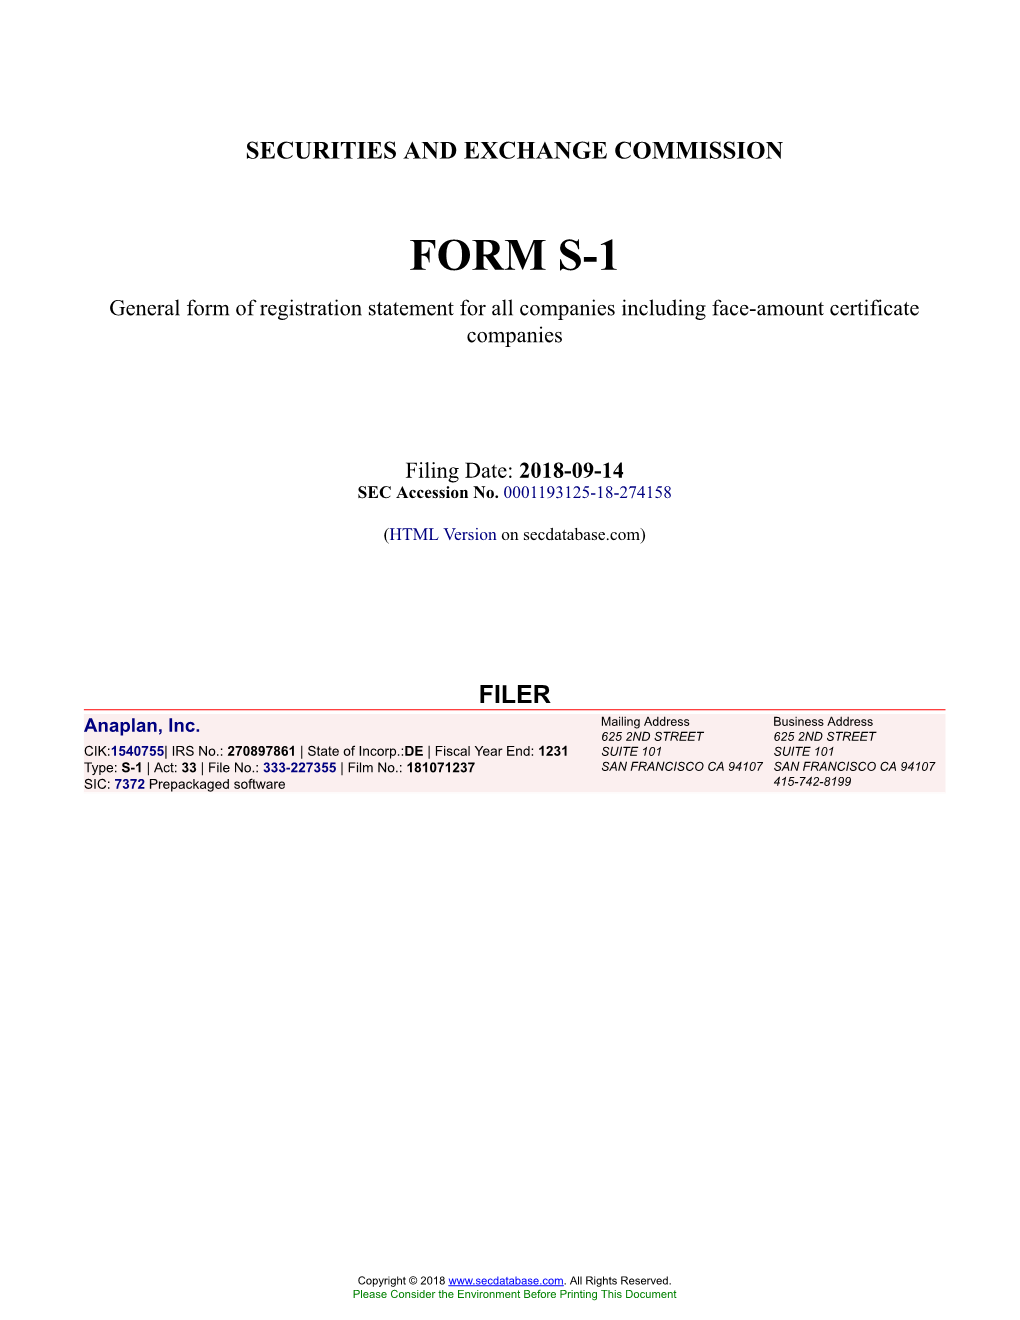 Anaplan, Inc. Form S-1 Filed 2018-09-14